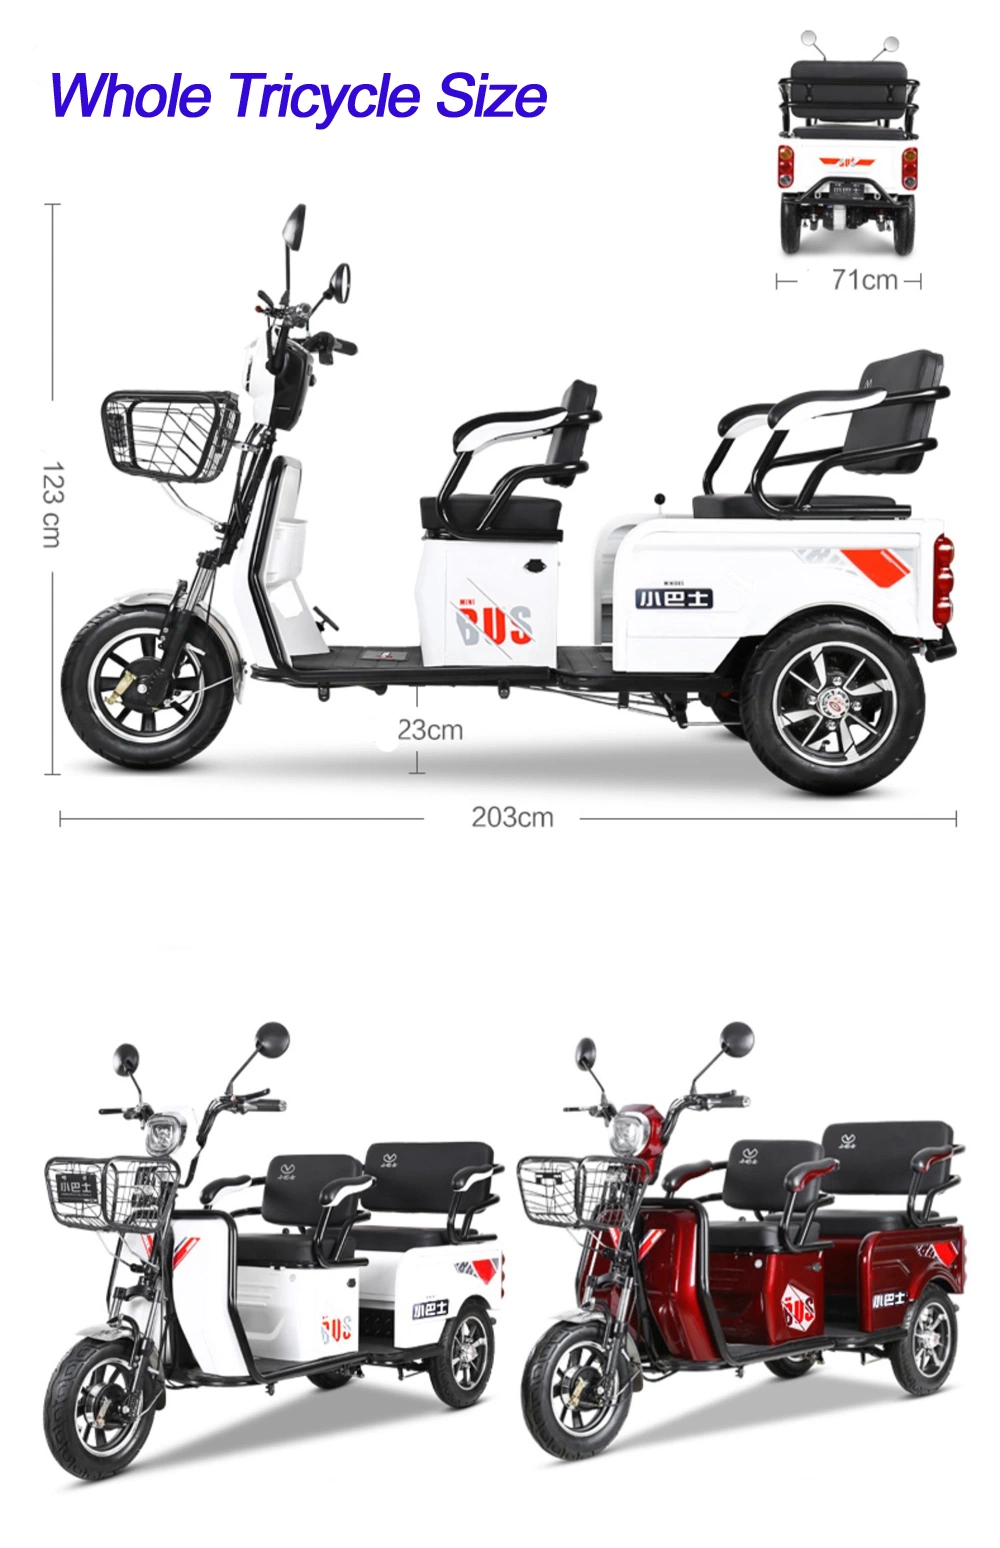 Al-A9 Tuk Tuk for Sale Bajaj Re Tuk Tuk Accessories Electric Tricycles Motorized Tricycles Cheap Electric Tricycle Price